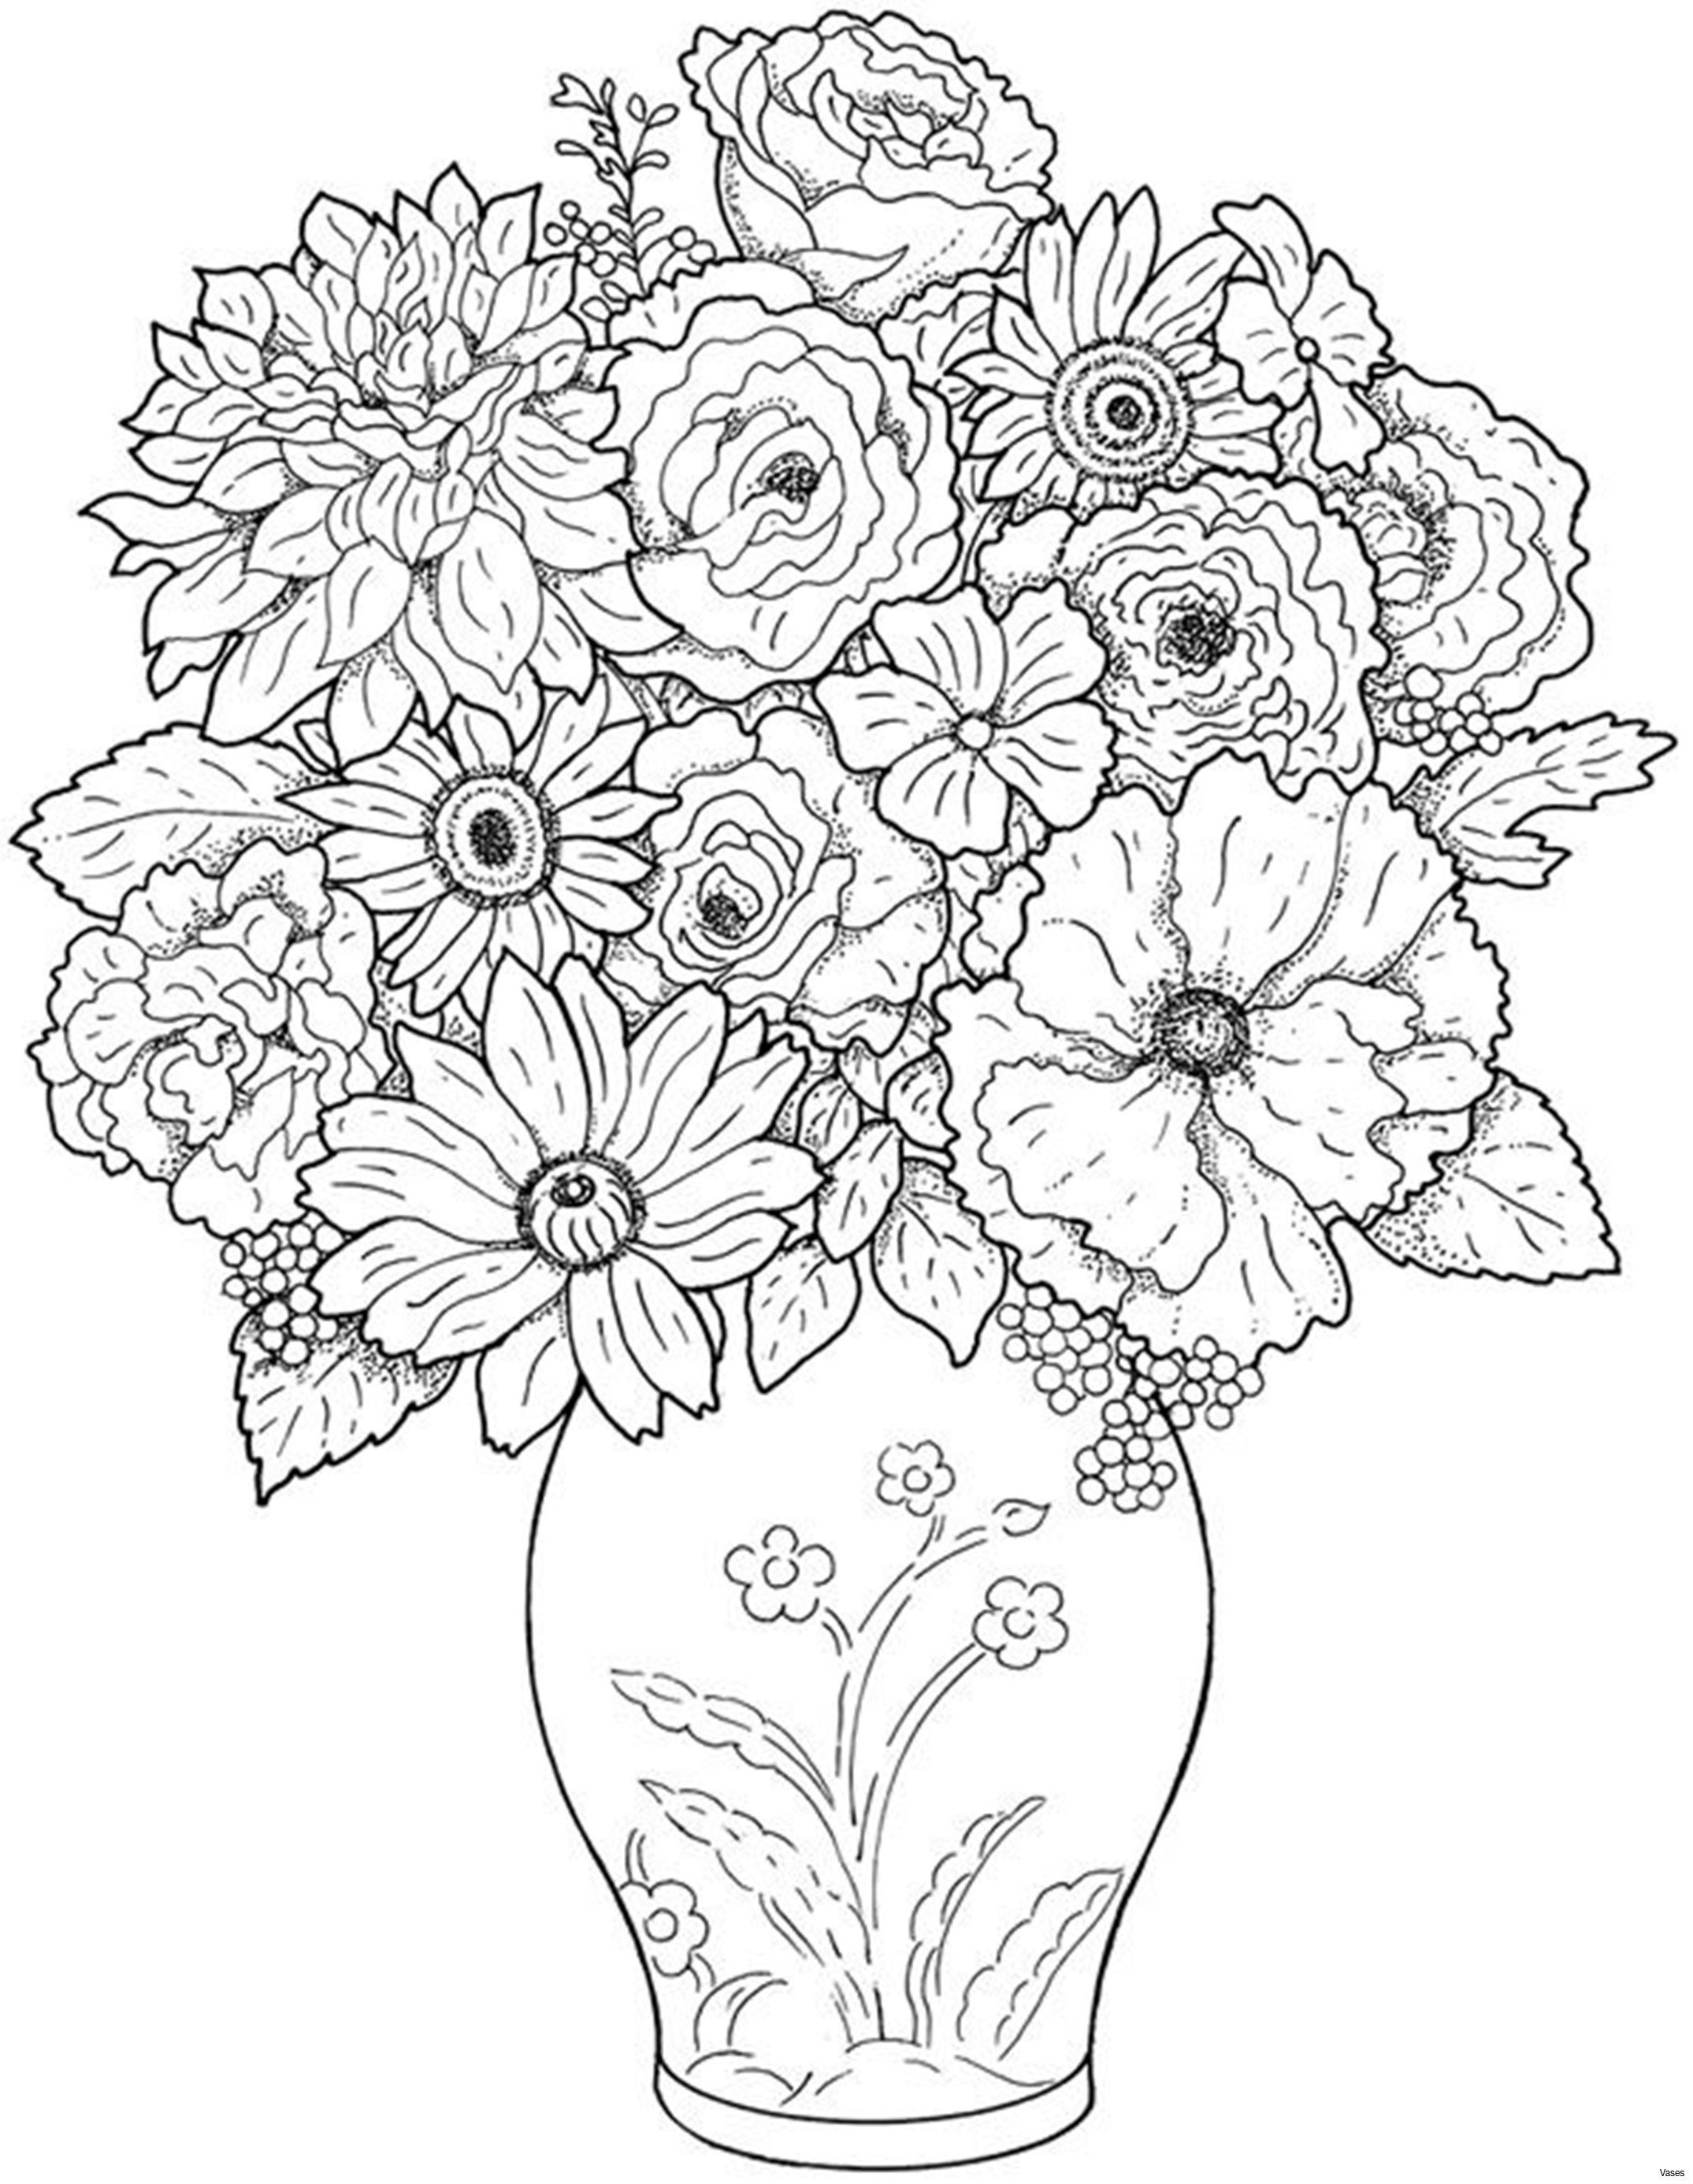 24 Fashionable Flower Vase Artificial 2022 free download flower vase artificial of flower pictures unique cool vases flower vase coloring page pages for flower pictures lovely colouring for children fresh cool vases flower vase of flower pictures 